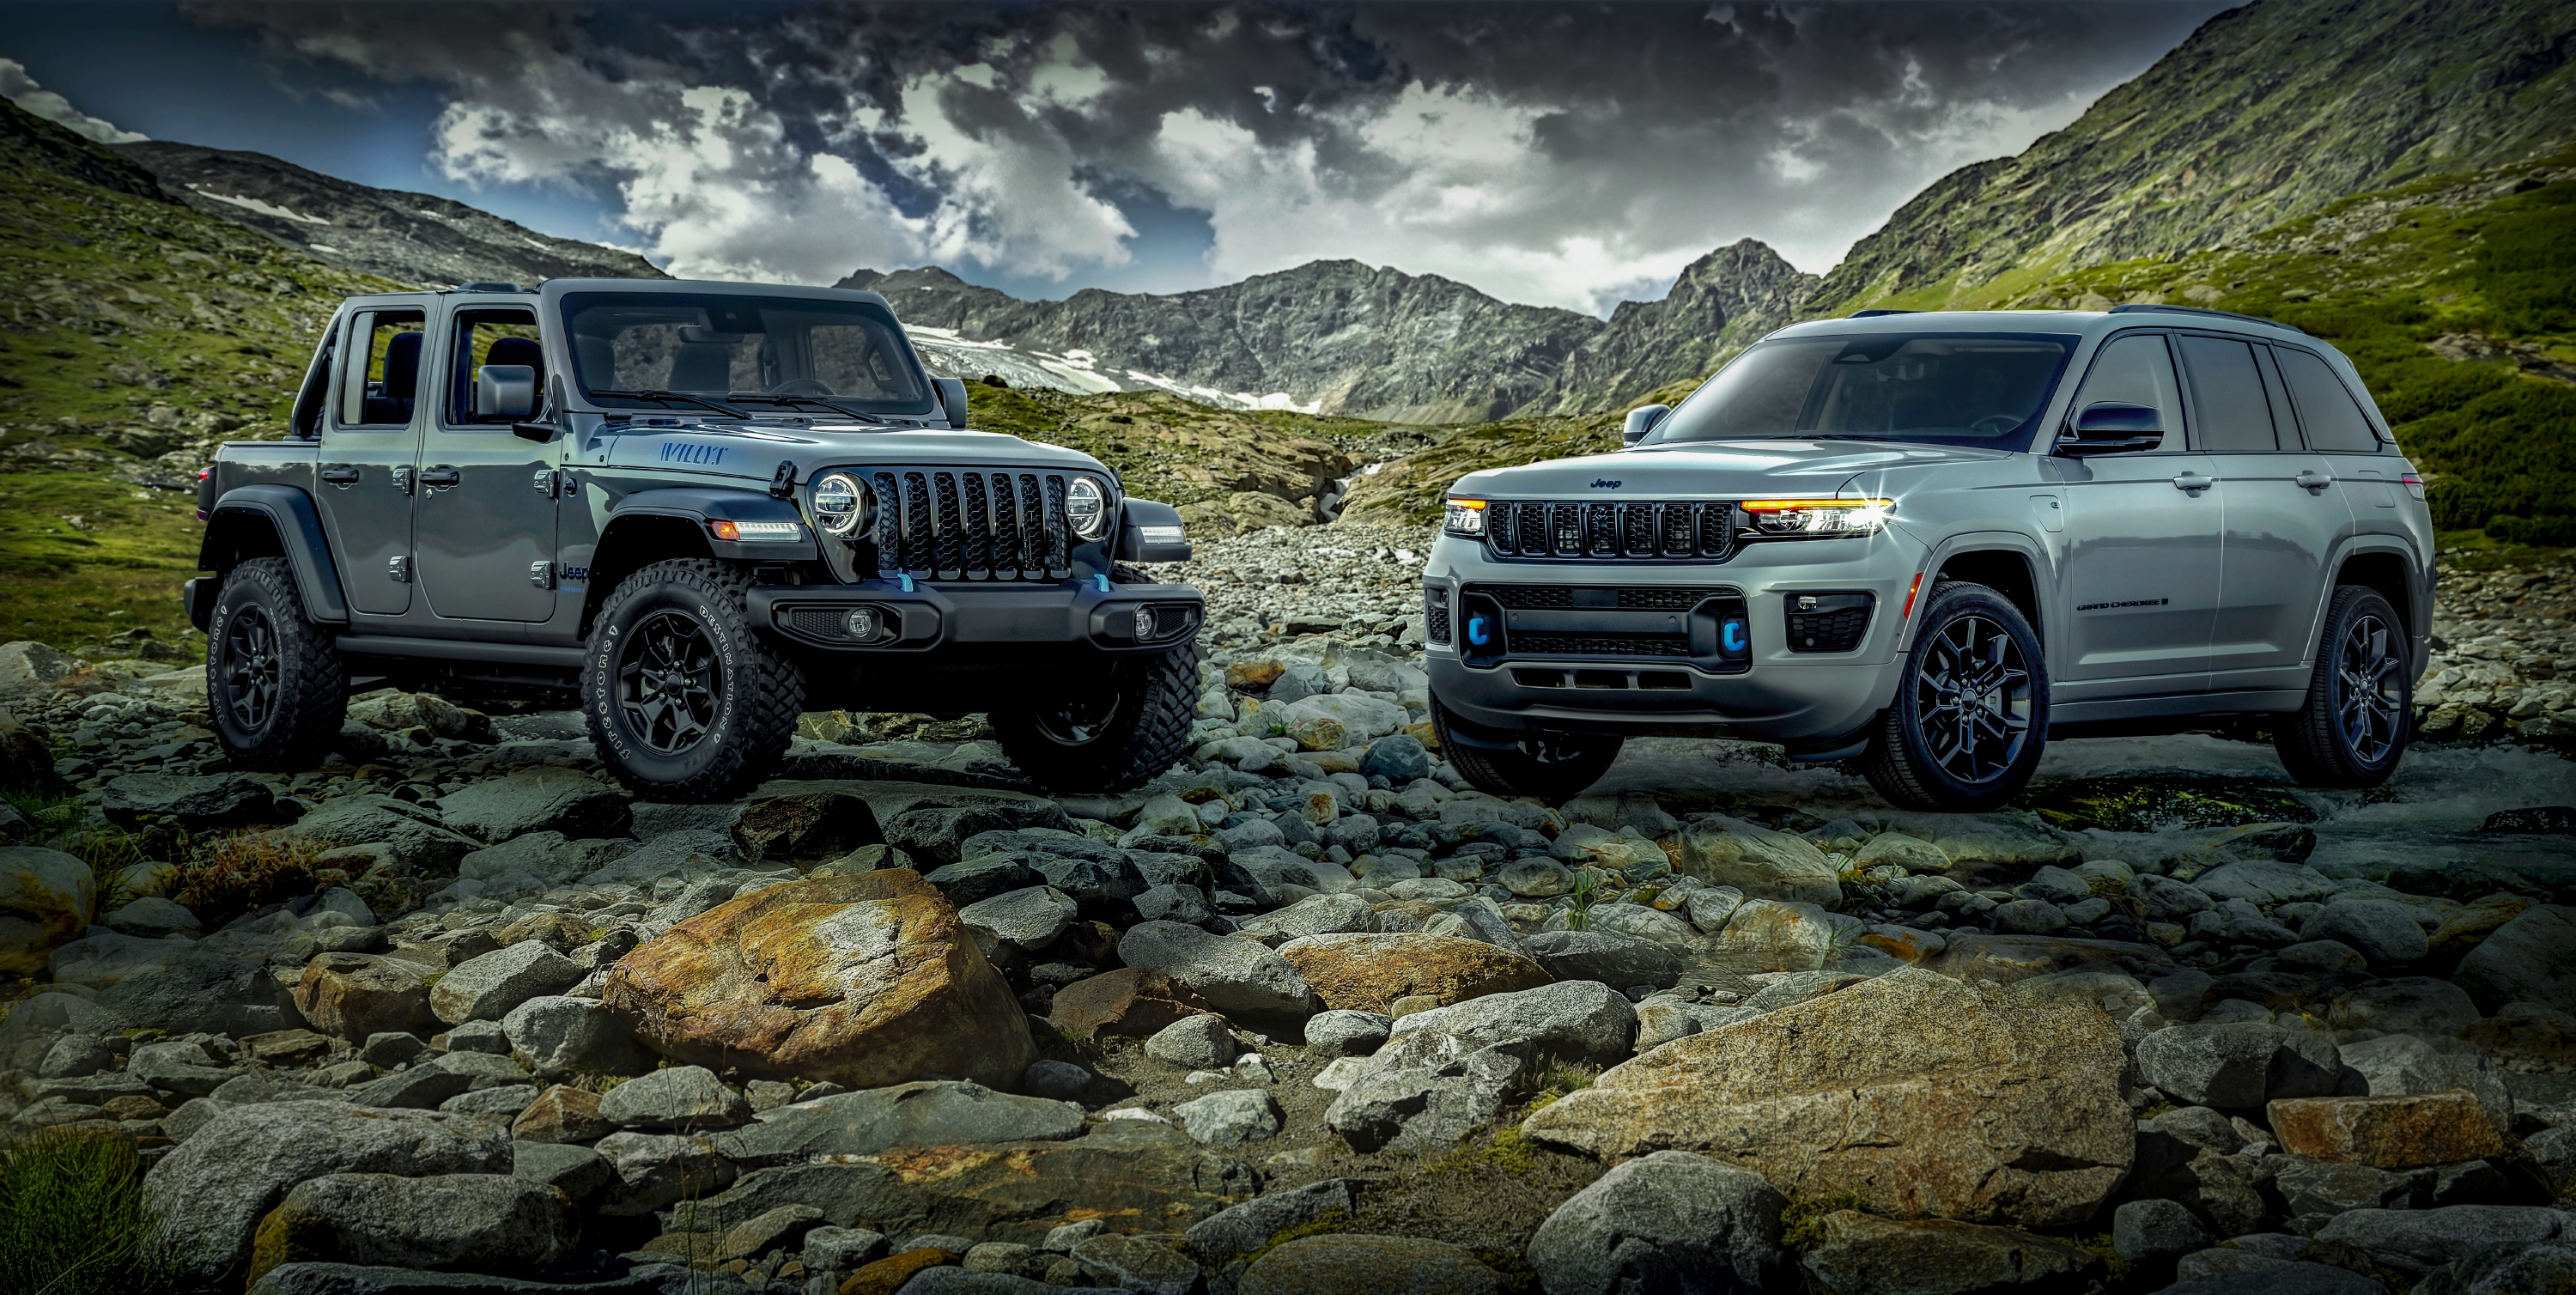 Jeep adds new Grand Cherokee and Wrangler trims to its 4xe lineup